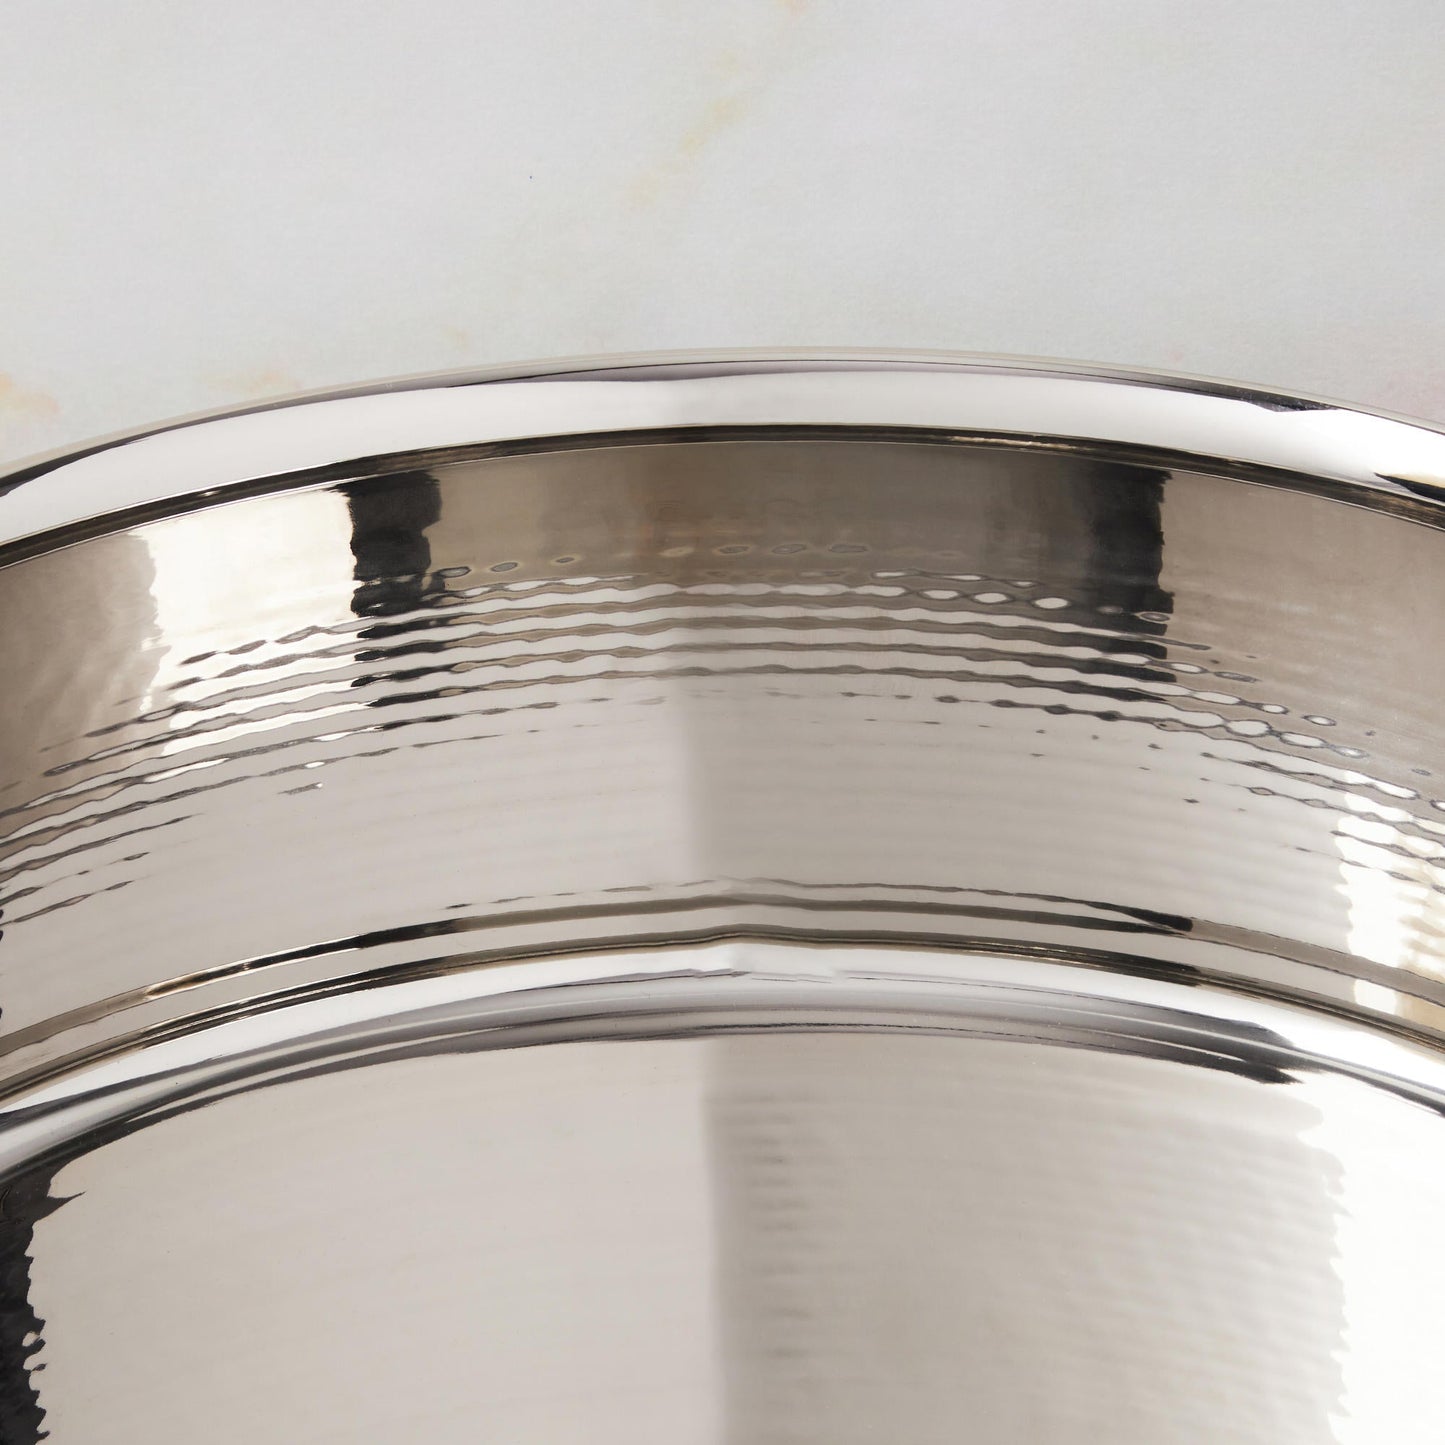 Mirror polished and hammered clad stainless steel saucepan from Ruffoni